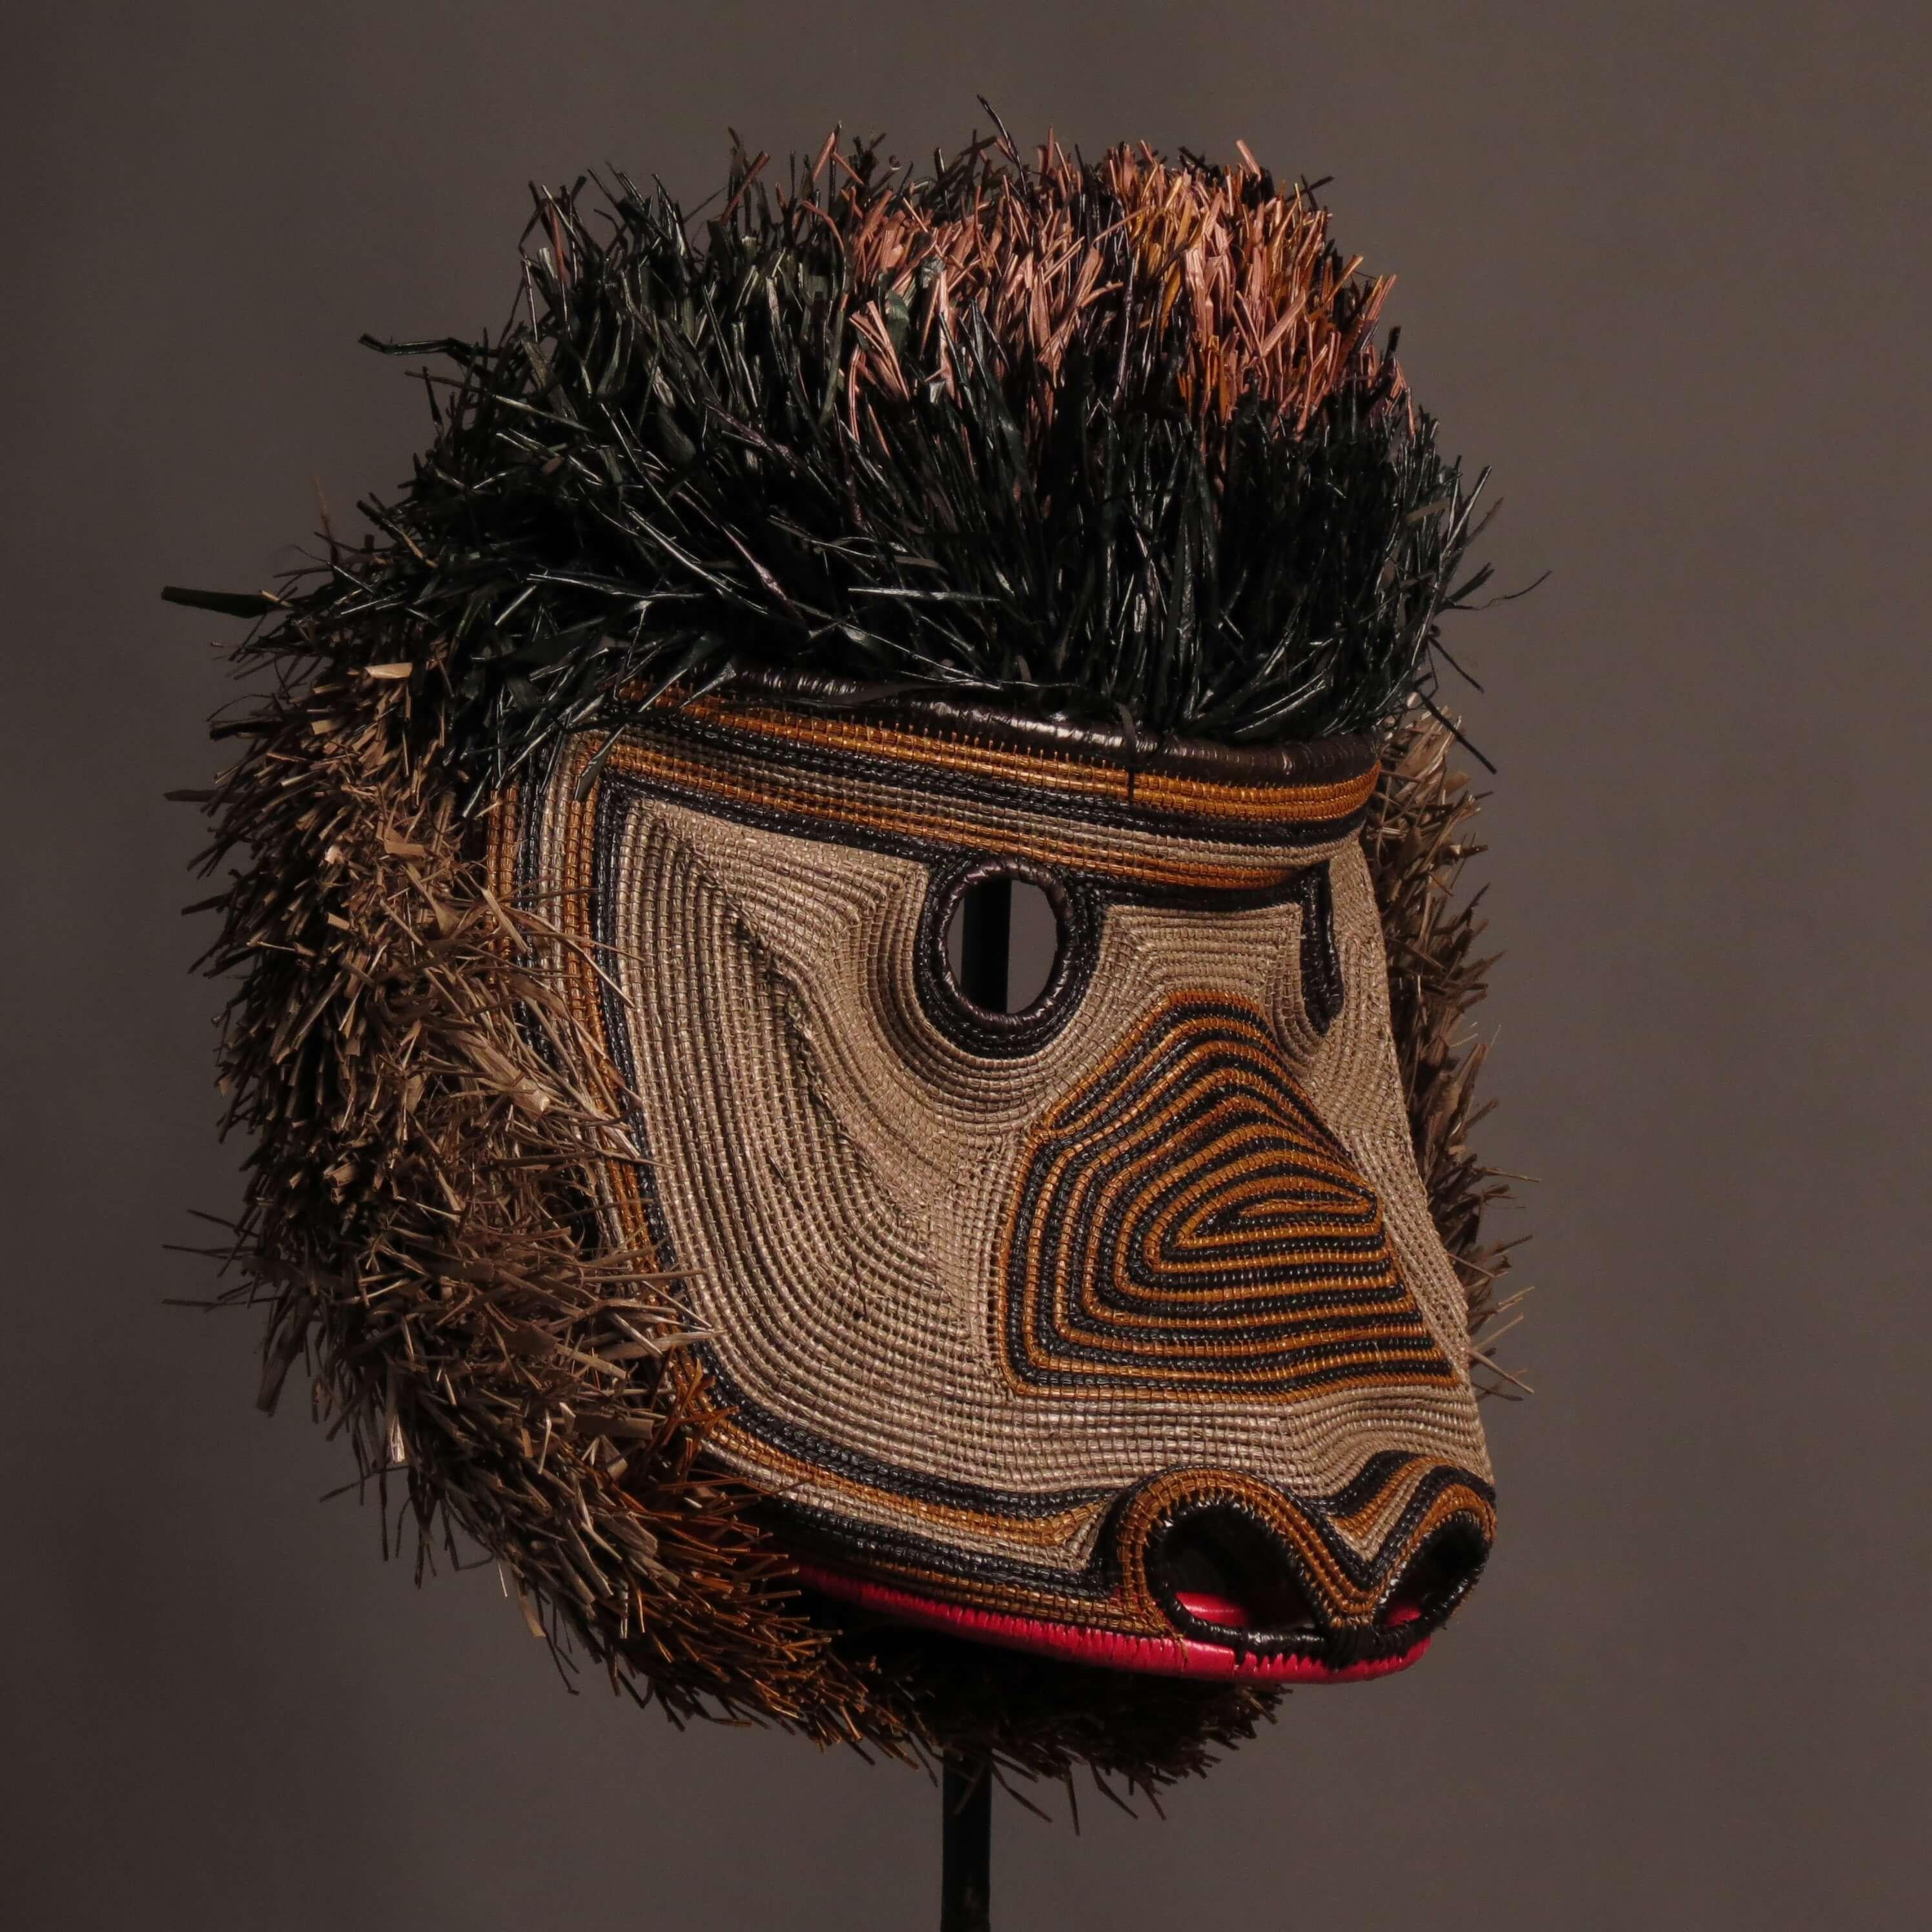 Extraordinary as works of art and decoration, this mask come from the Shamanic beliefs and rituals of the Central American tribes.
The Indigenous people divide the world in two, a visible world and a parallel world which is invisible.
These